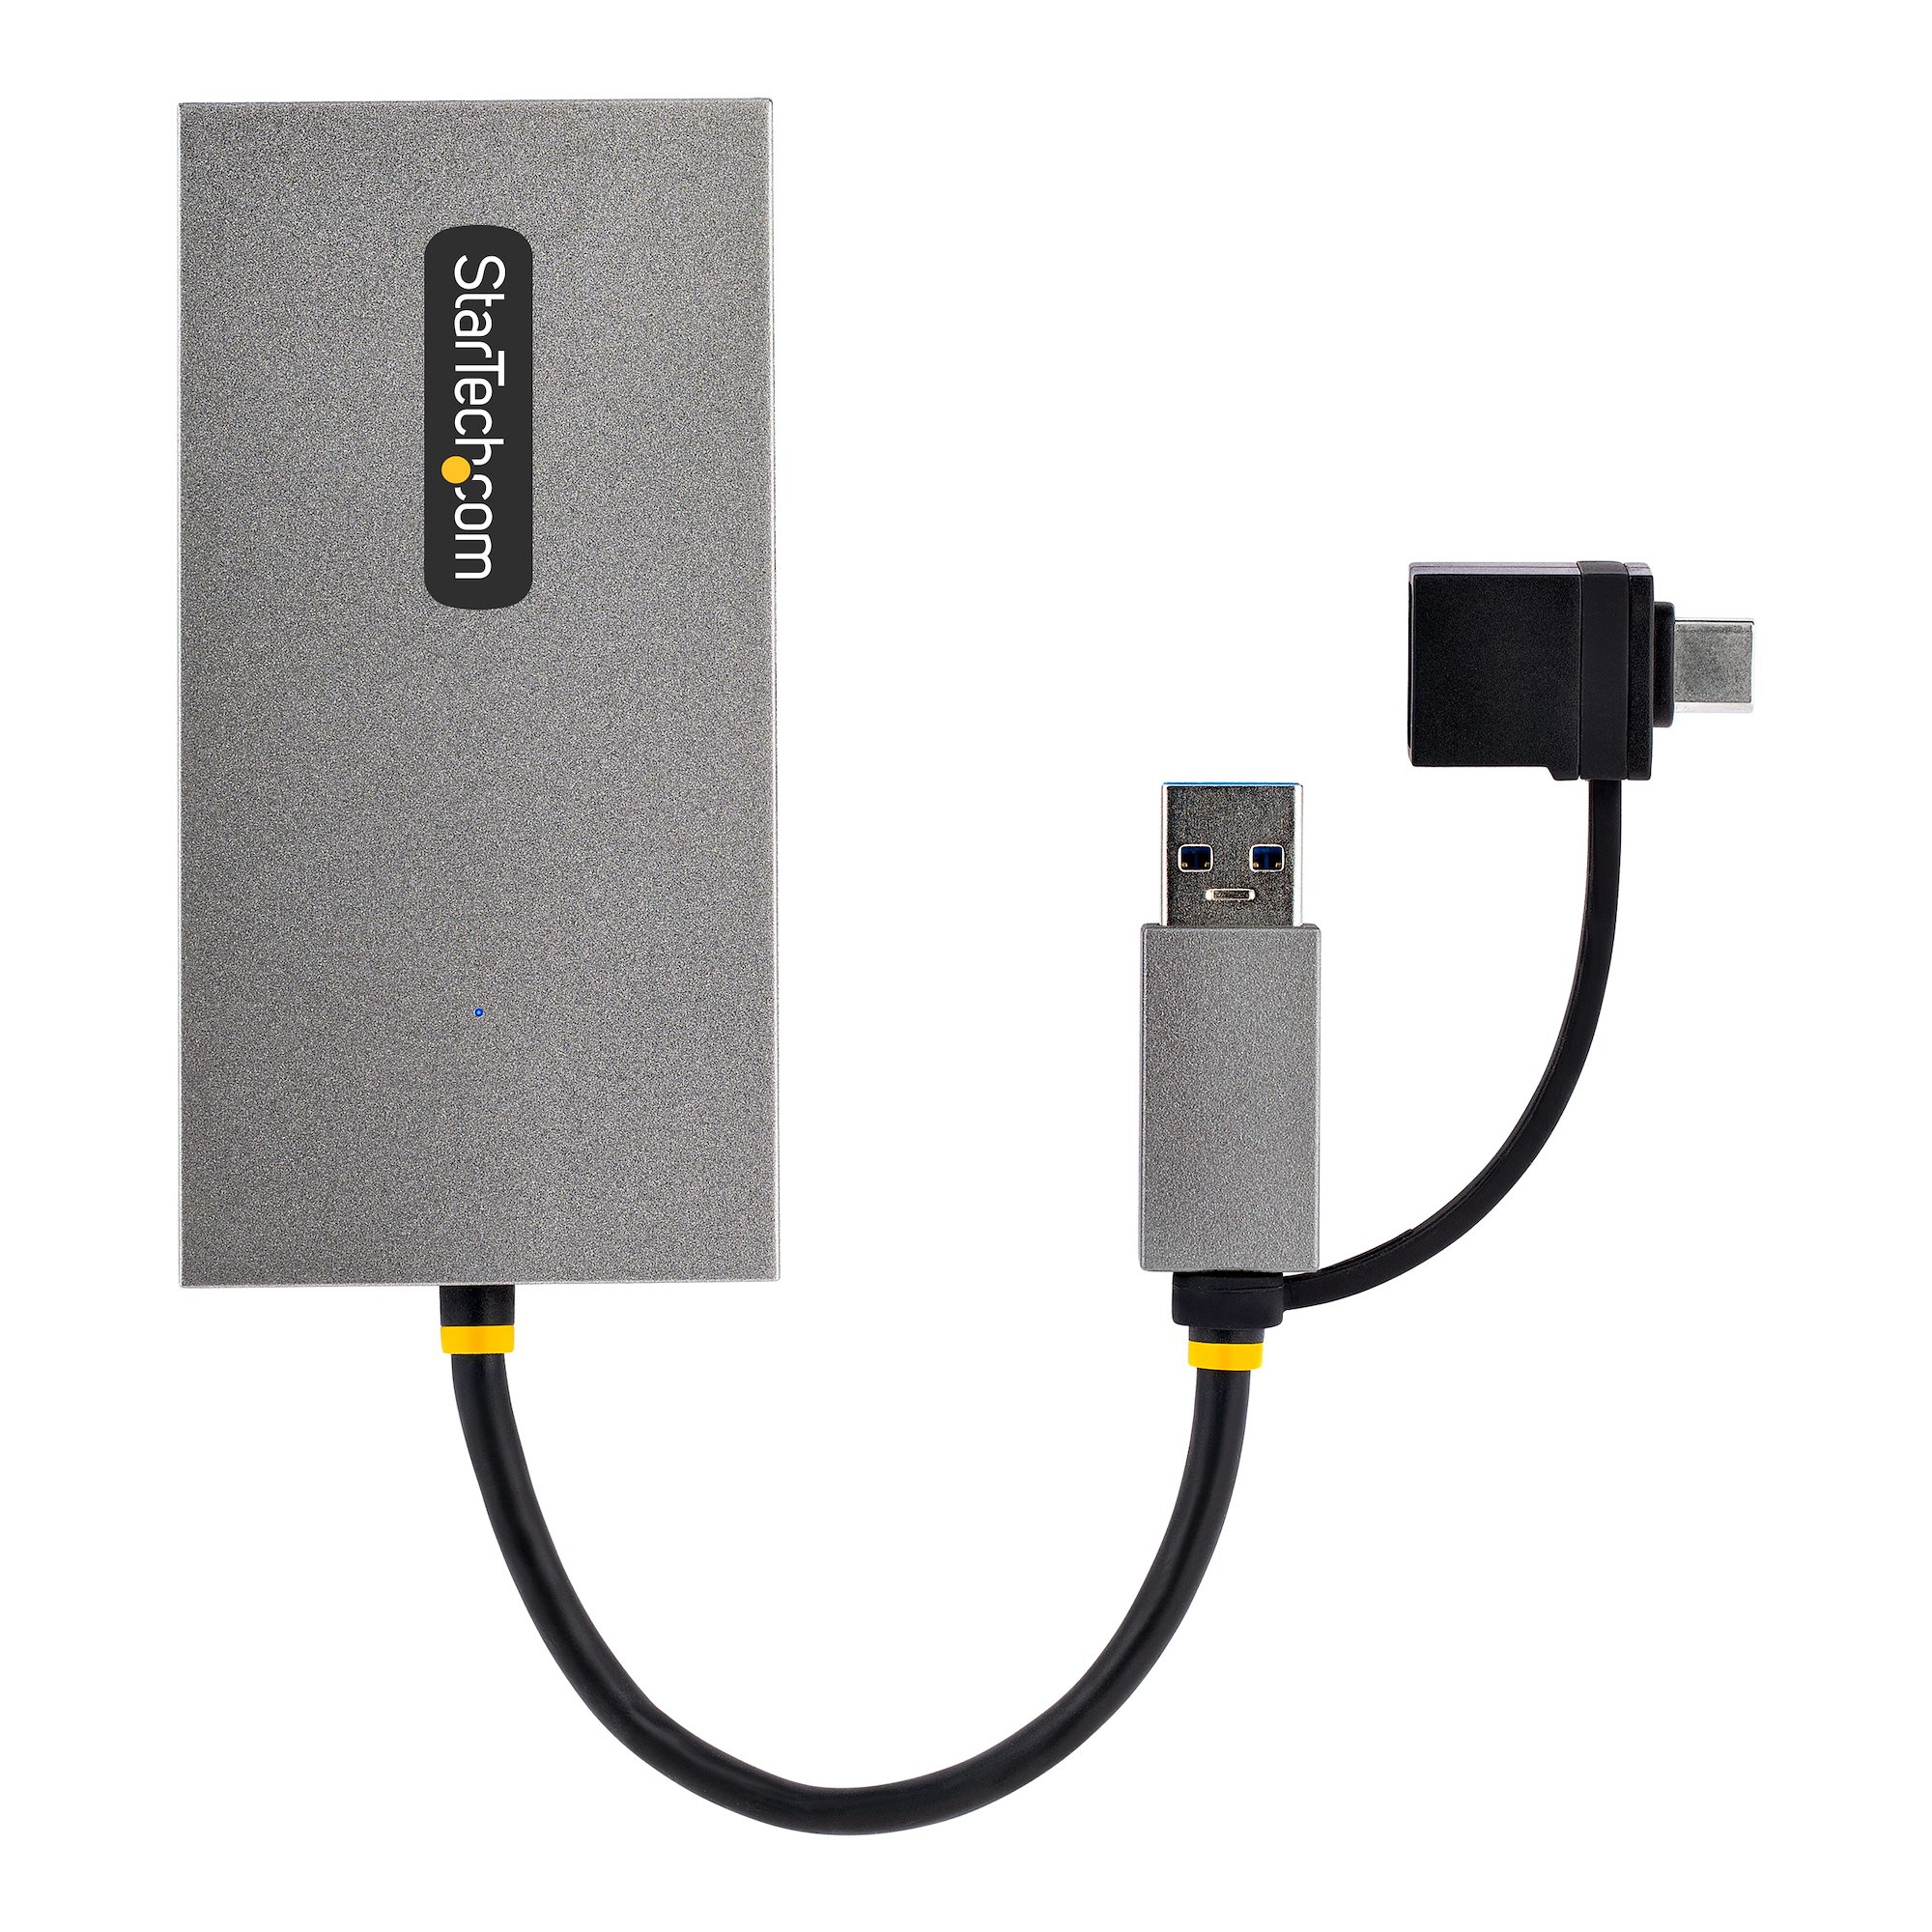 StarTech.com USB to Dual HDMI Adapter, USB A/C to 2x HDMI Displays (1x 4K30Hz, 1x 1080p), Integrated USB-A to C Dongle, 4in/11cm Cable, USB 3.0 to HDMI Display Adapter, Windows & macOS